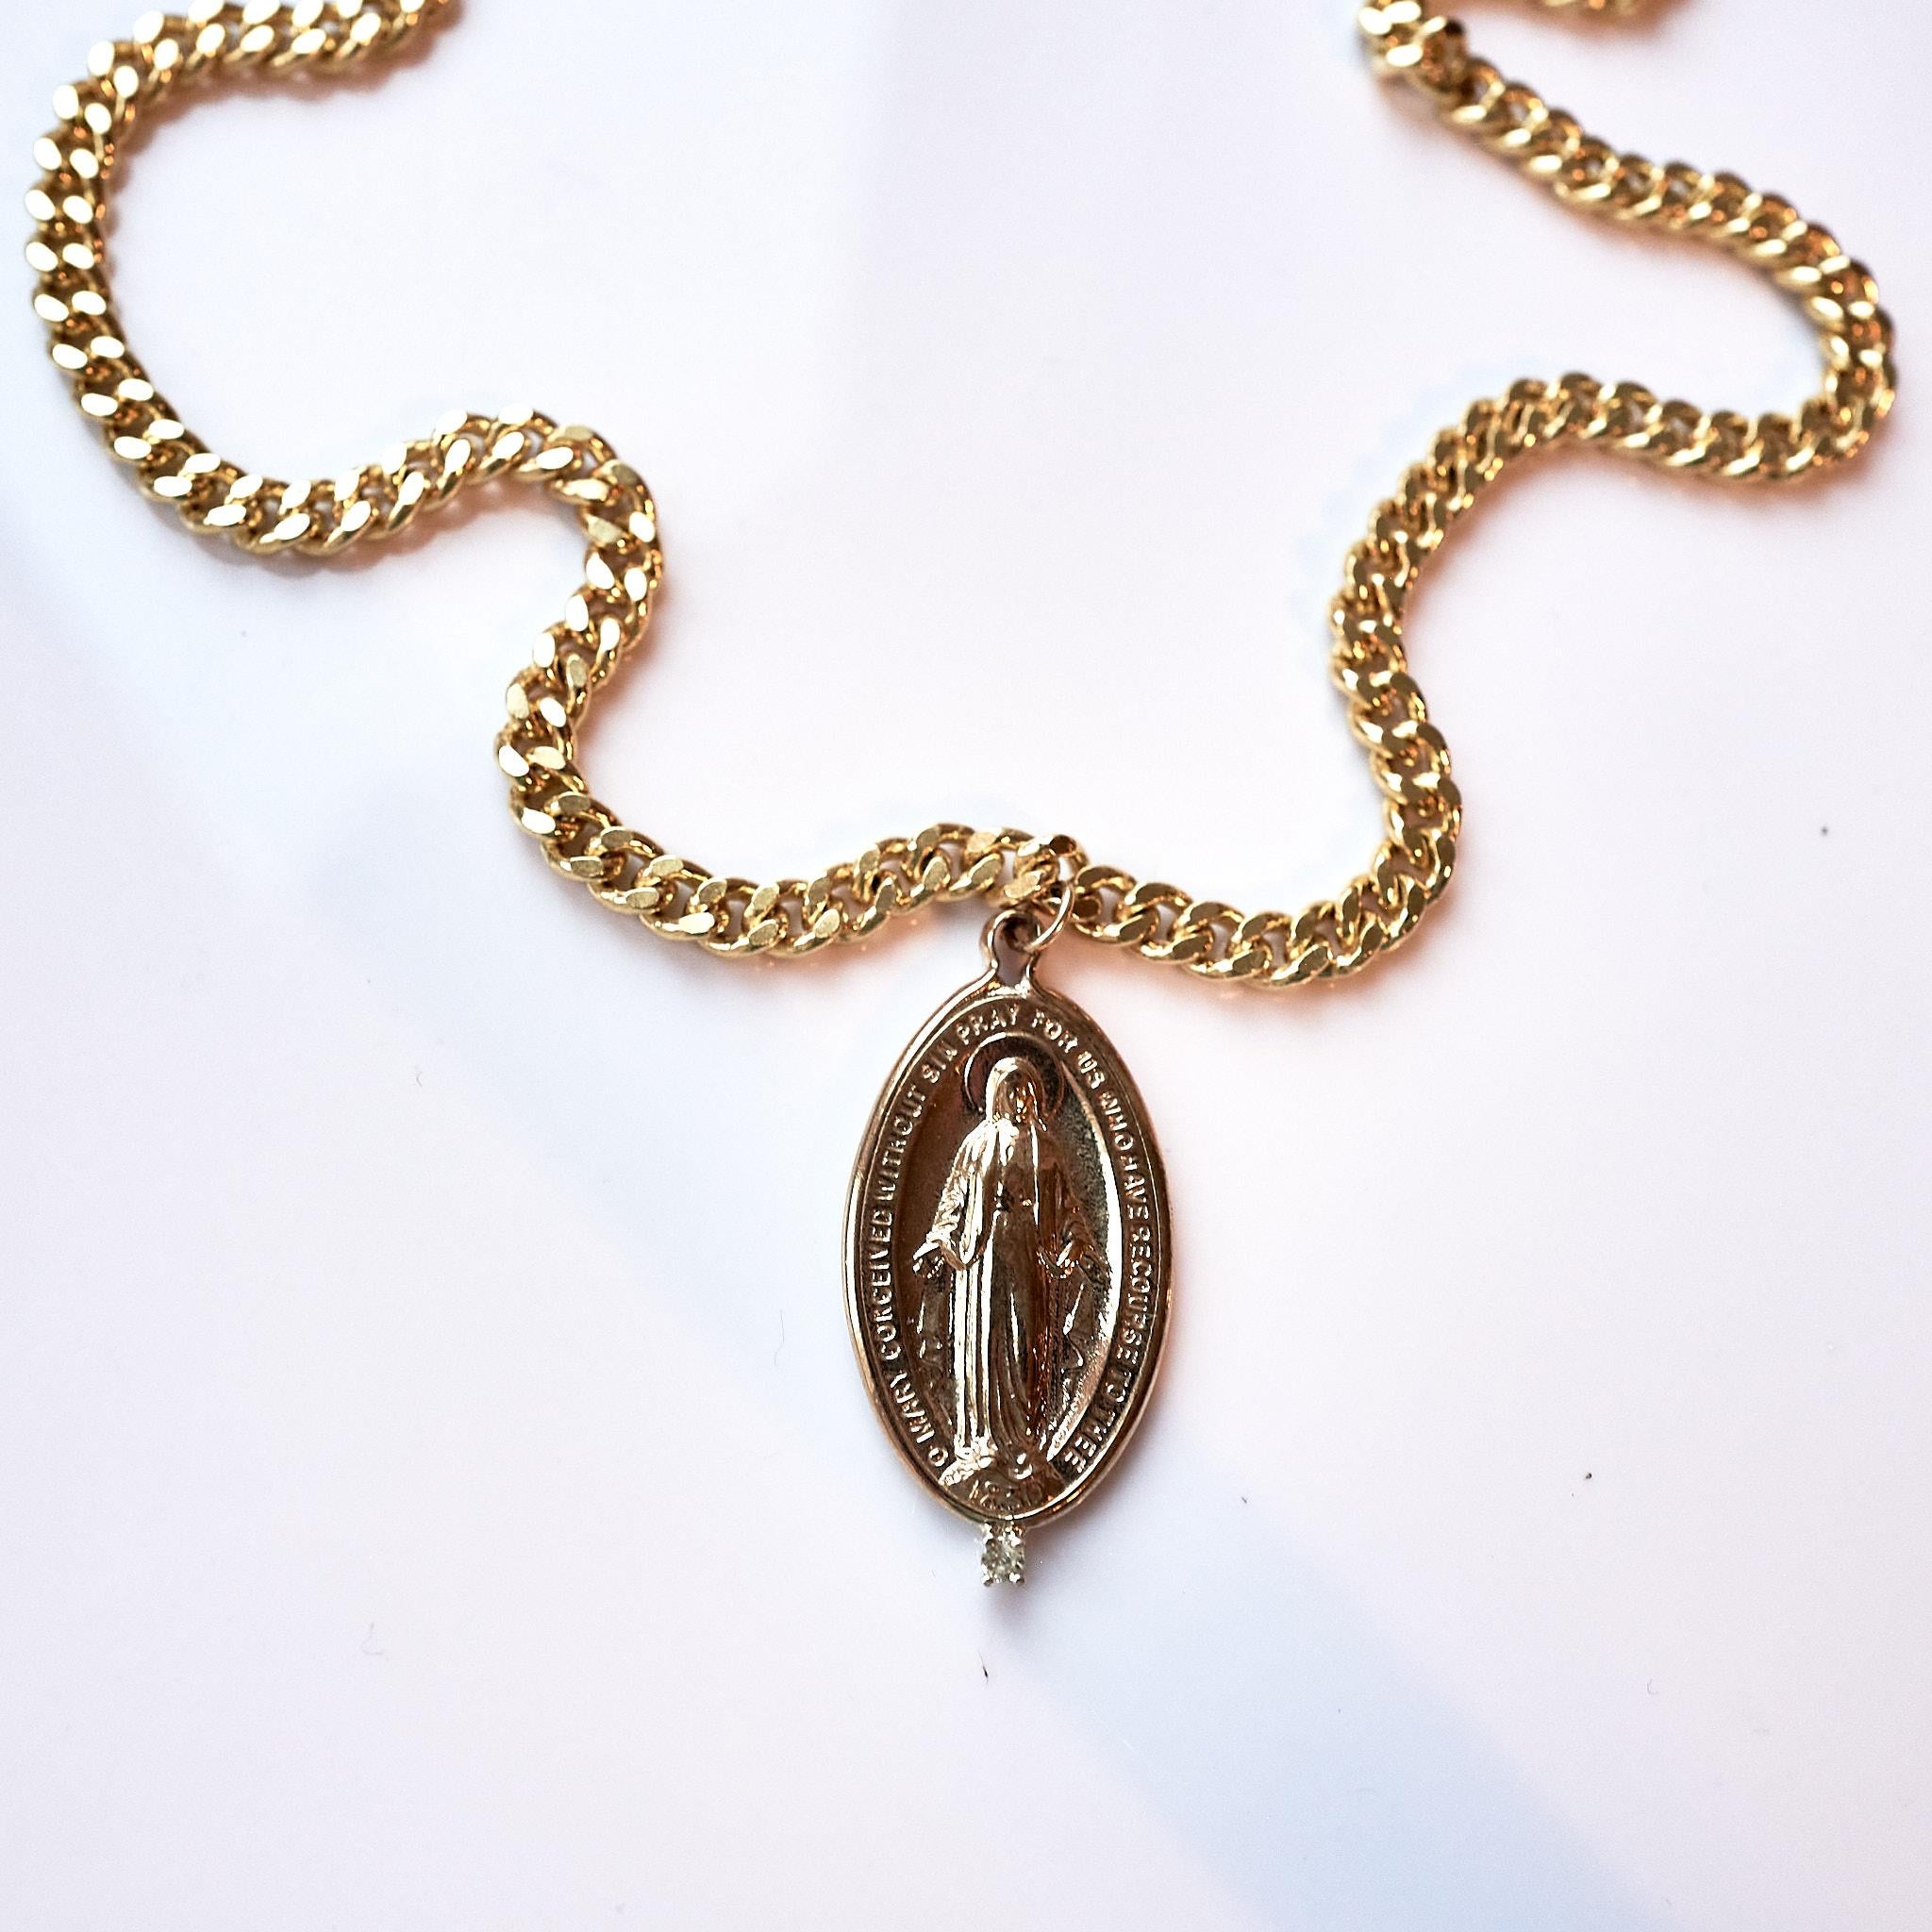 White Medal Virgin Mary Oval Medal Chain Necklace J Dauphin For Sale 6